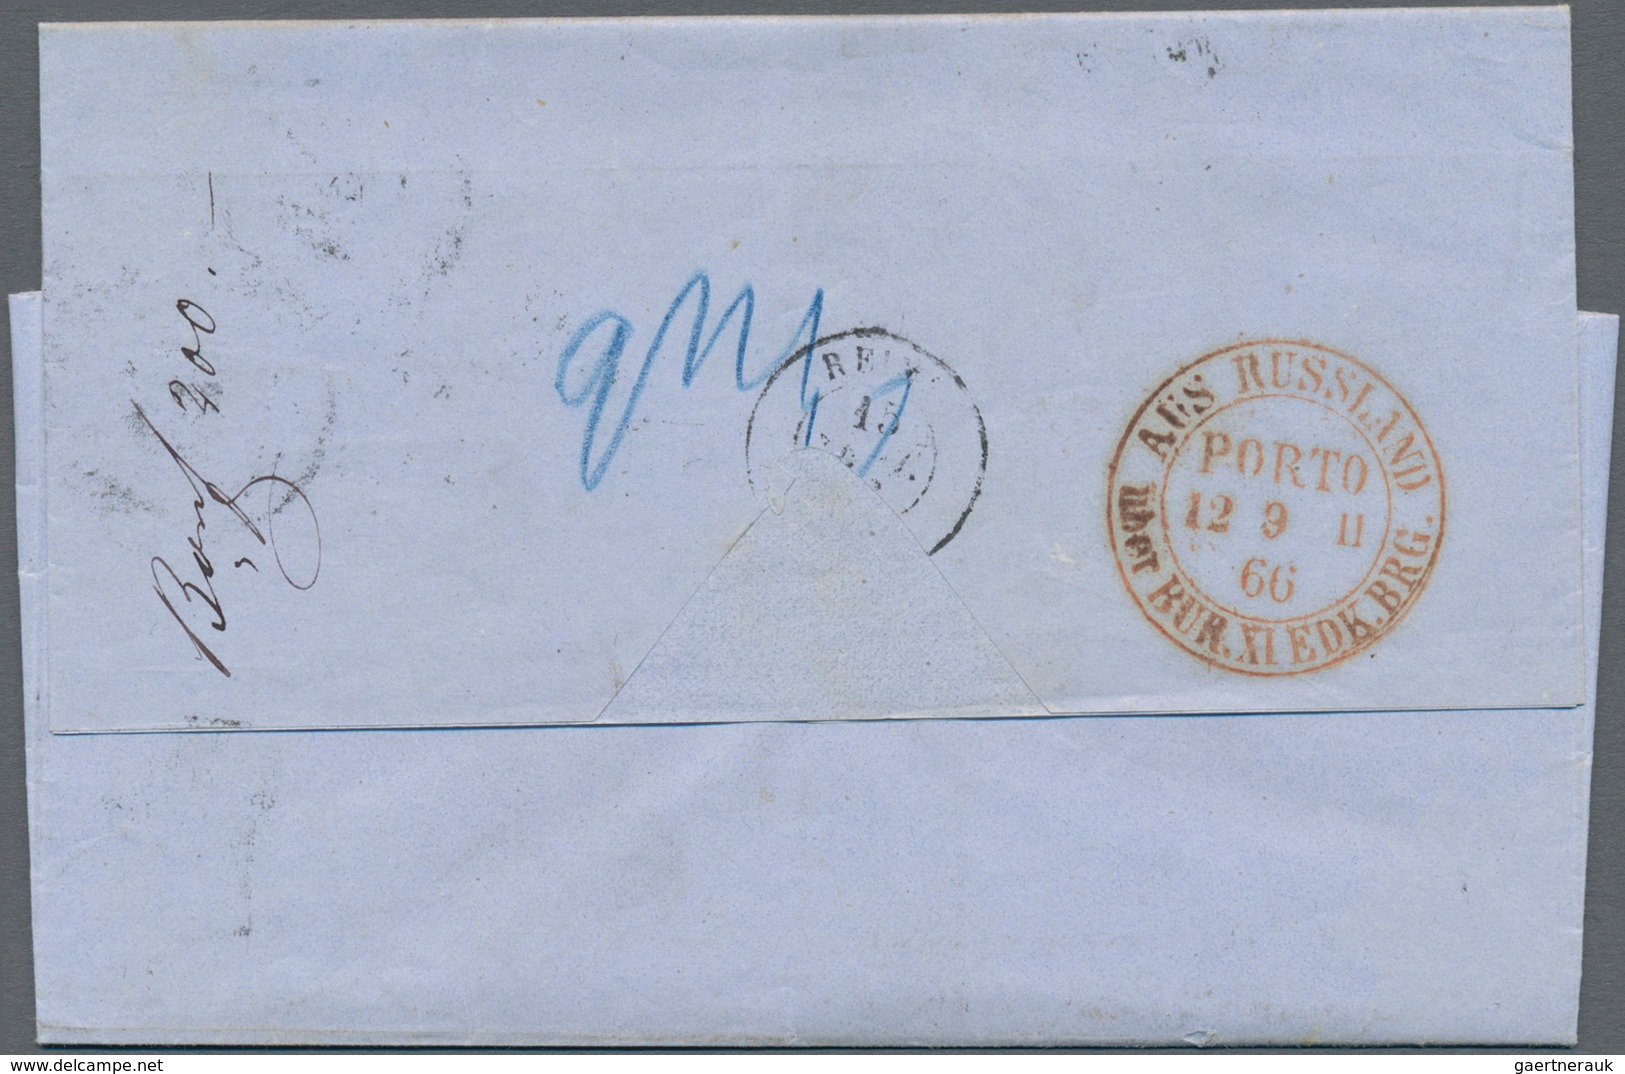 Russland: 1863/1866, four folded letters from RIGA adressed to Roederer in Reims bearing different t